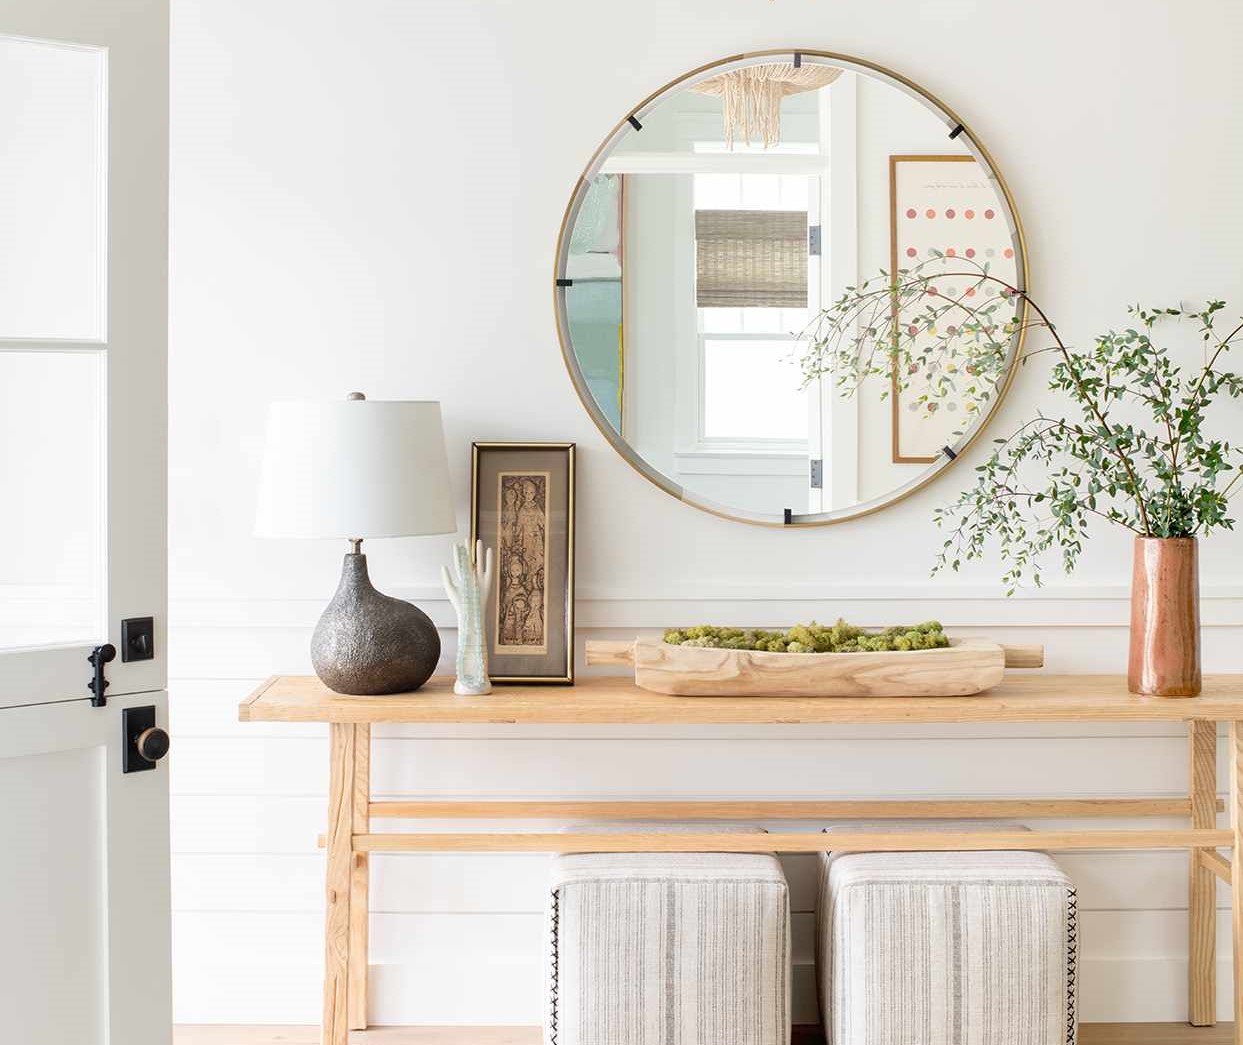 Organizing An Entryway: 10 Clever Ways To Arrange A Home’s Entrance